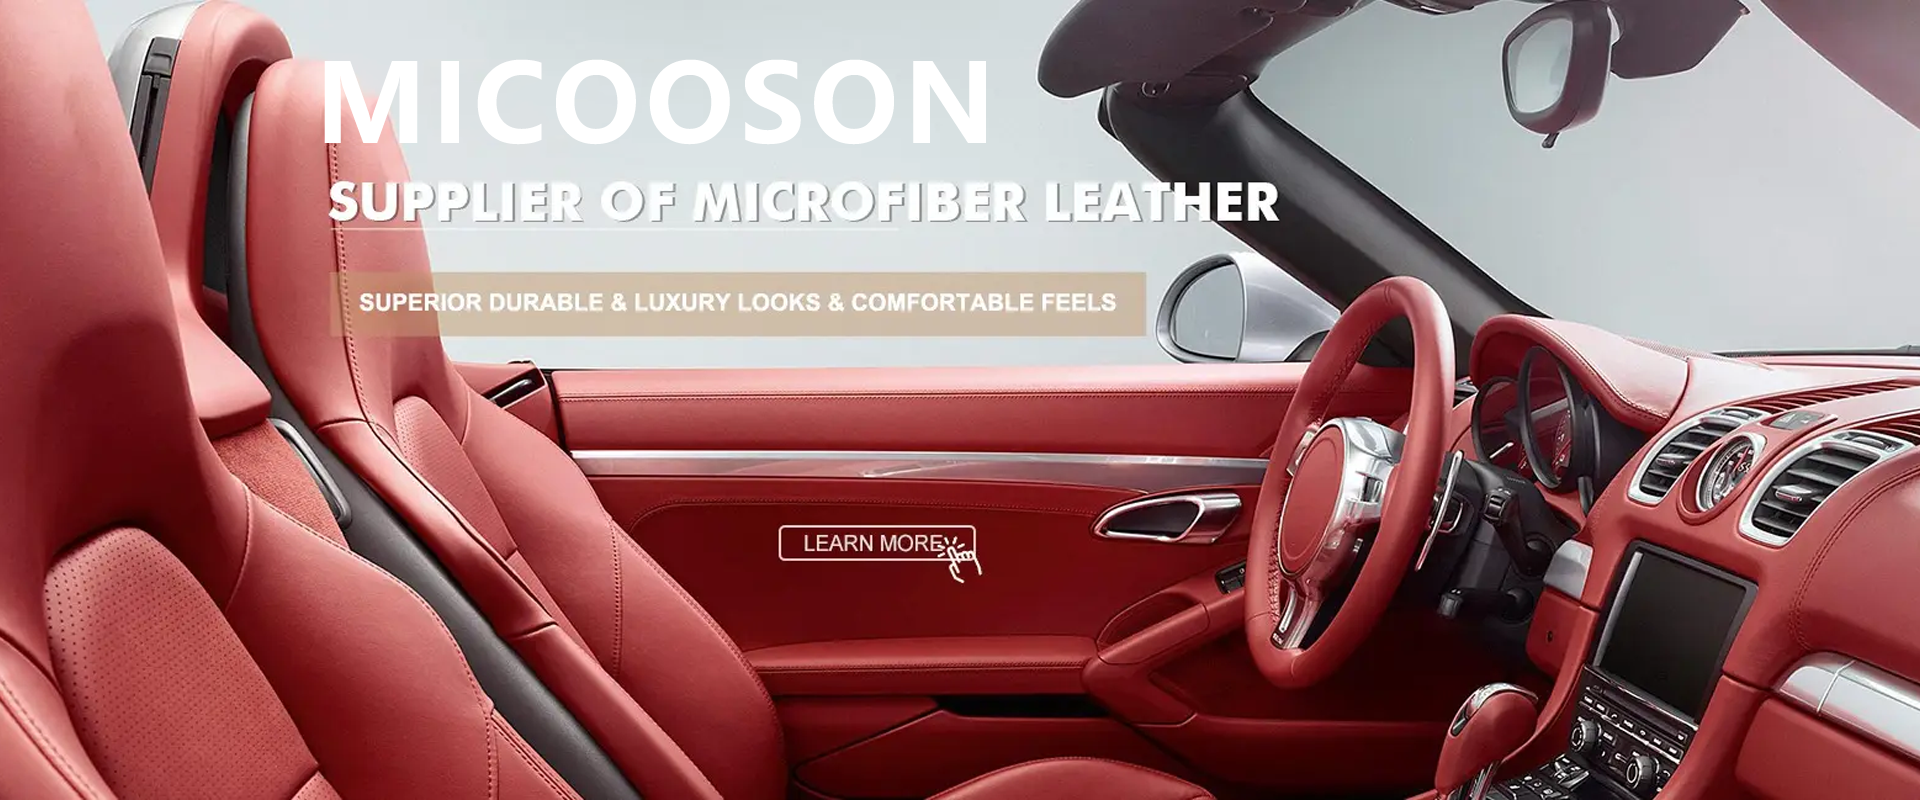 Microfiber leather for car